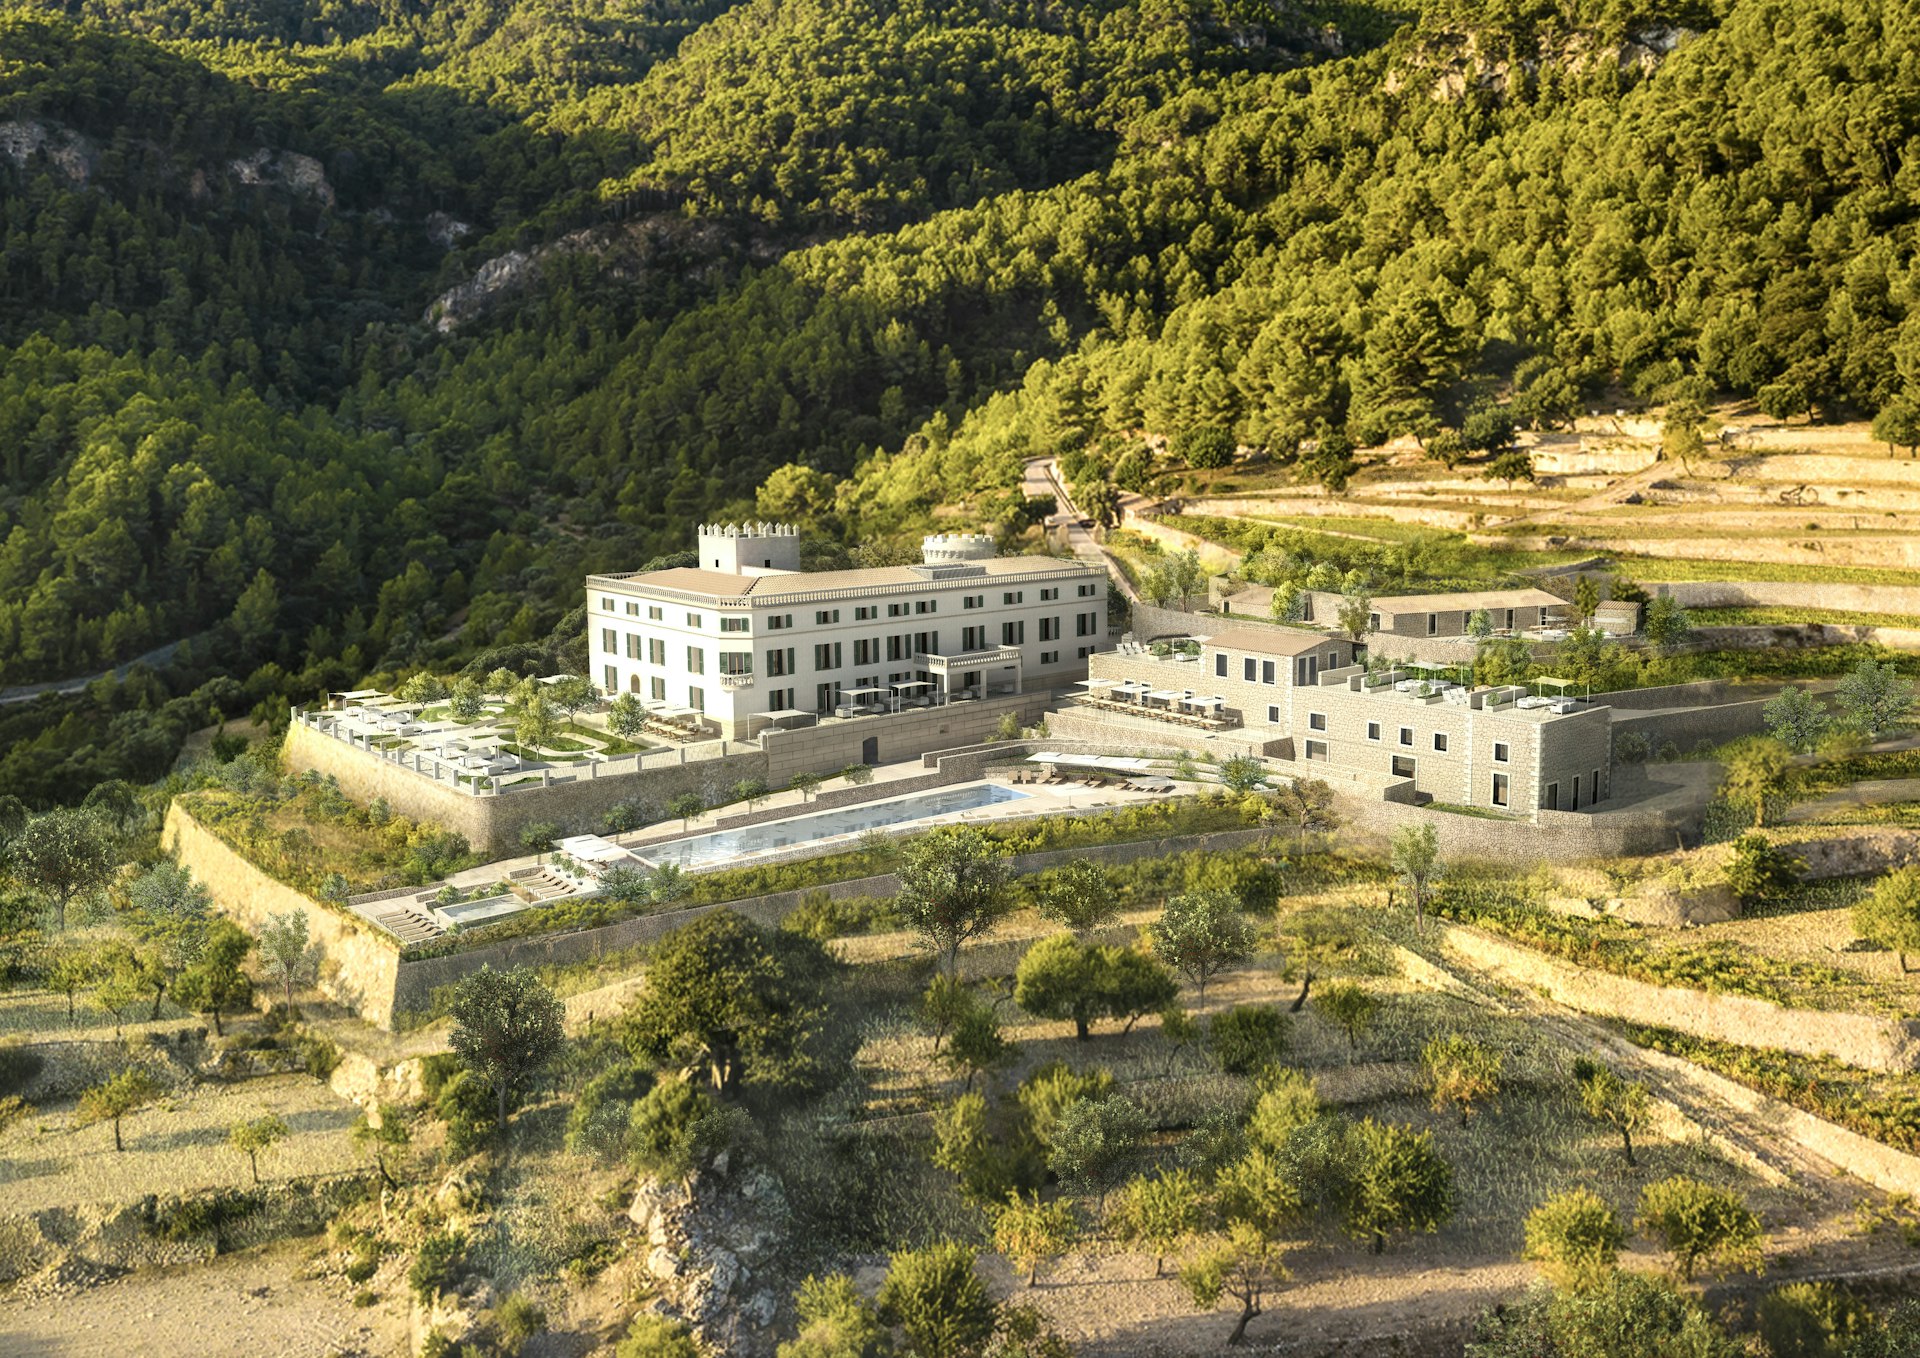 An aerial rendering of the Son Bunyola Hotel in Mallorca